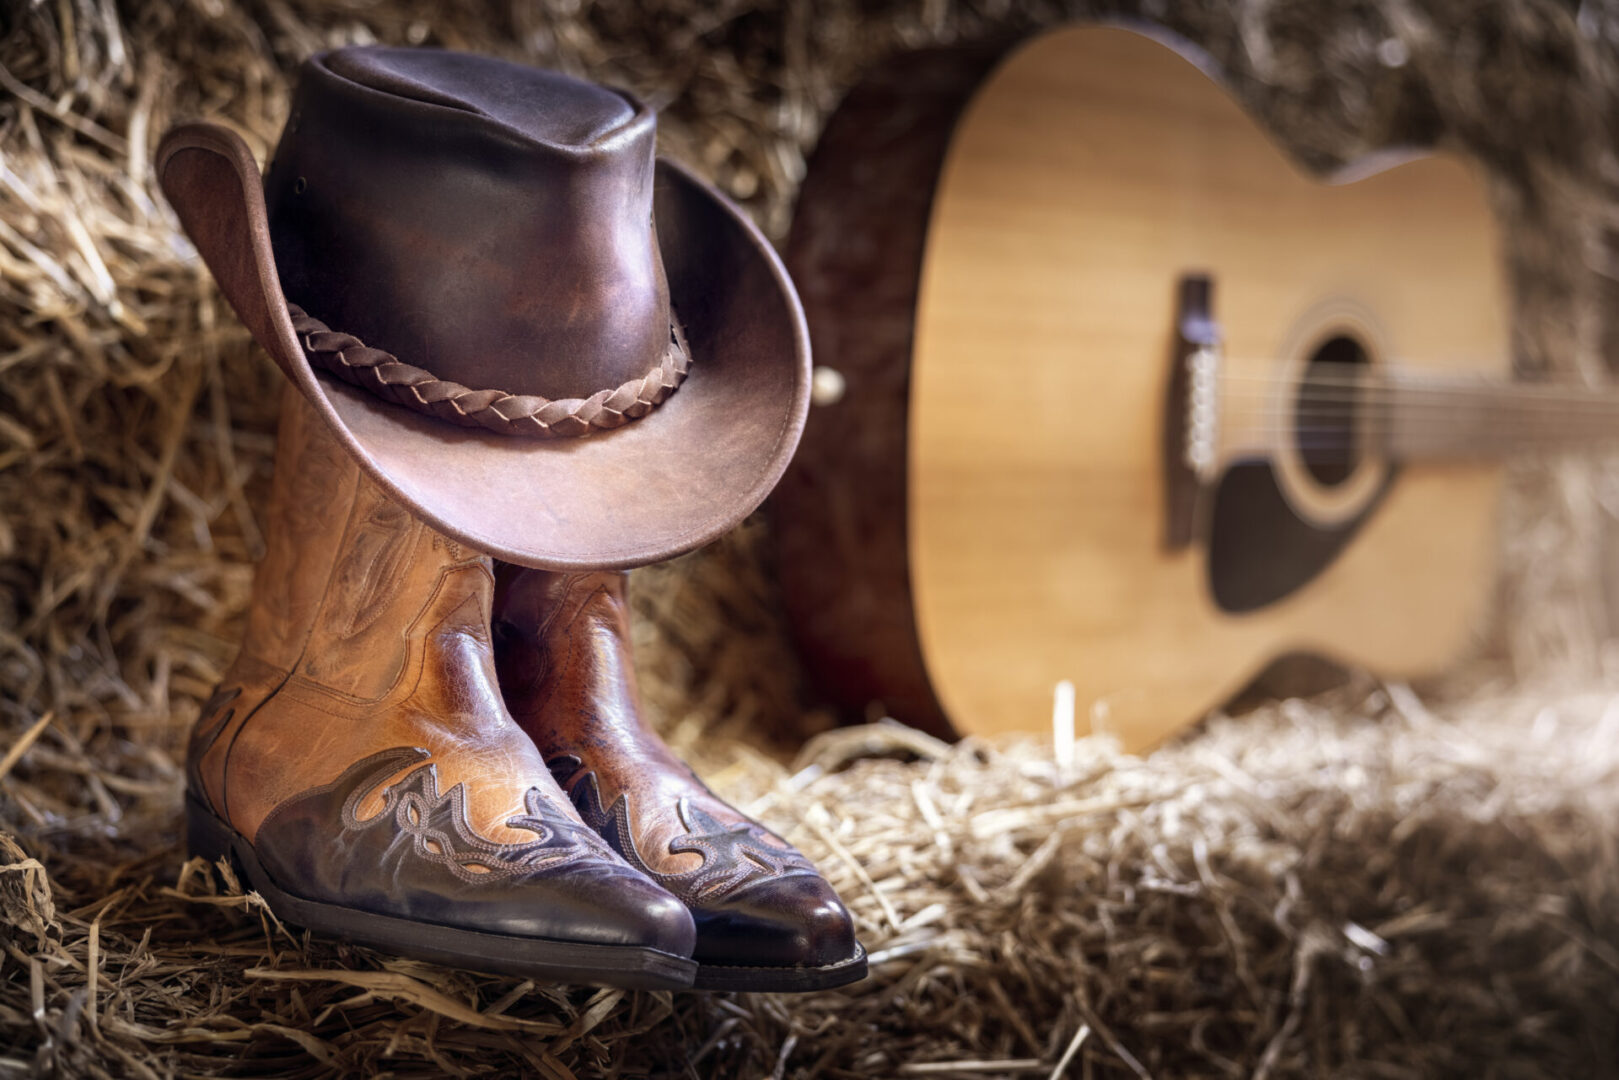 Country music festival live concert or rodeo with cowboy hat guitar and boots in barn background